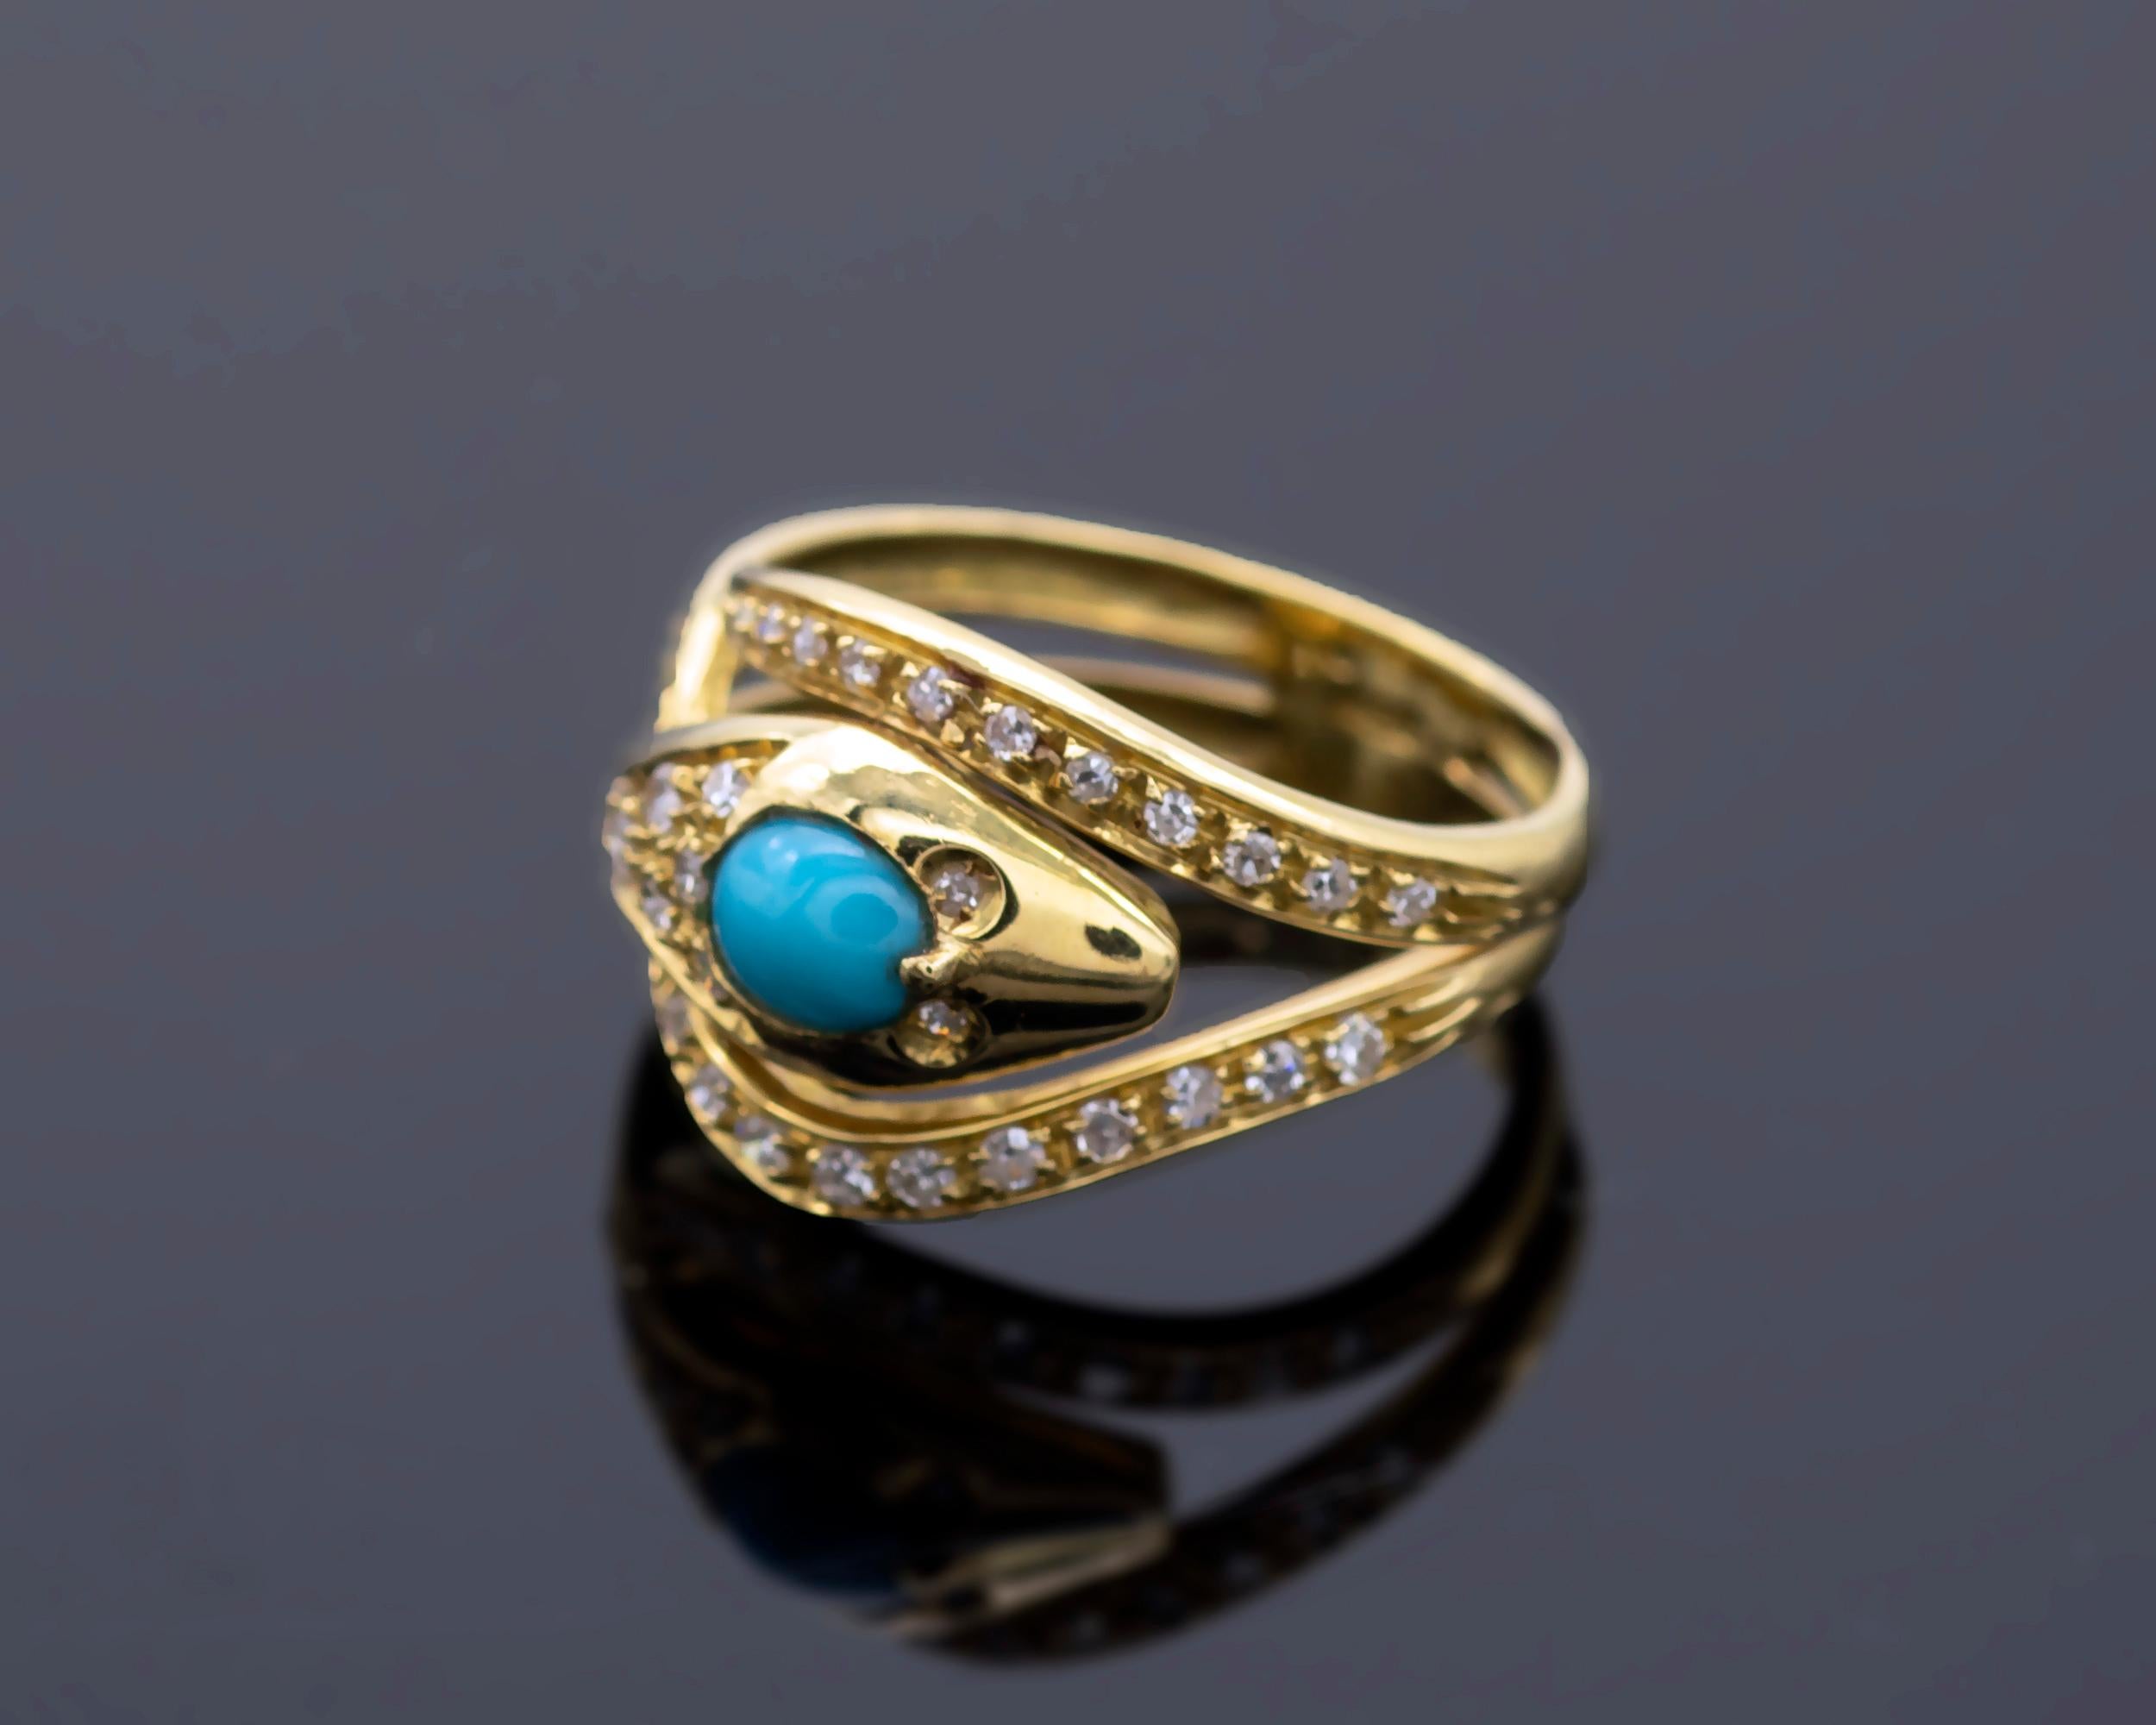 A 18kt yellow gold snake ring wrapping around the finger. A Persian turquoise with vibrant colour on its head, the eyes and body are set with diamonds.
